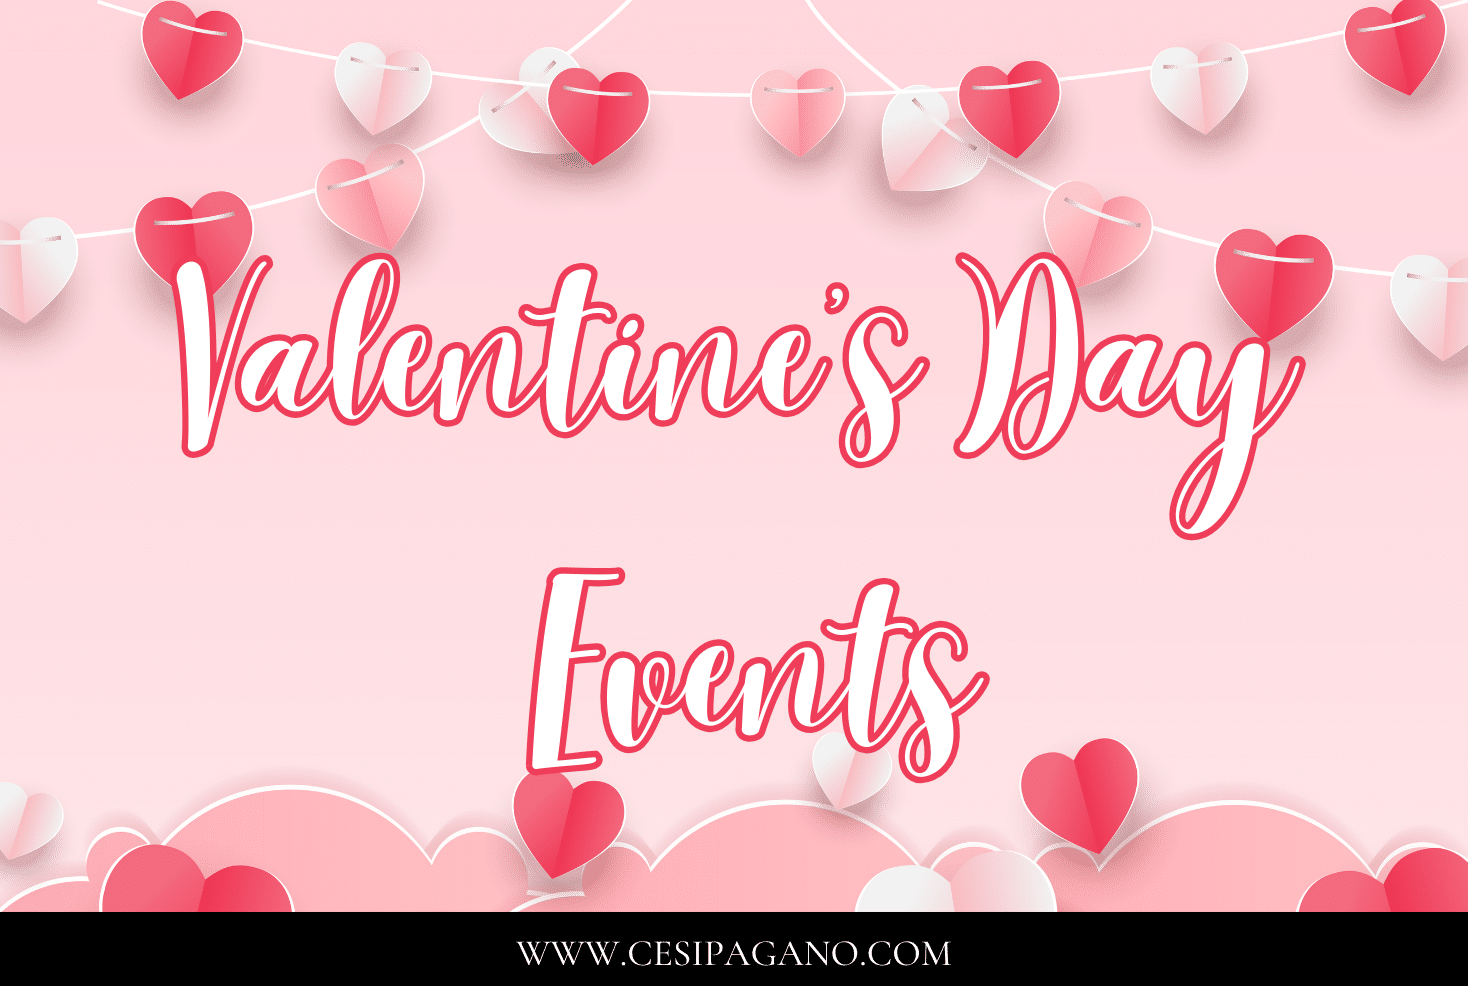 Celebrating Love Together: Valentine’s Day for Adults and Families 💘💕